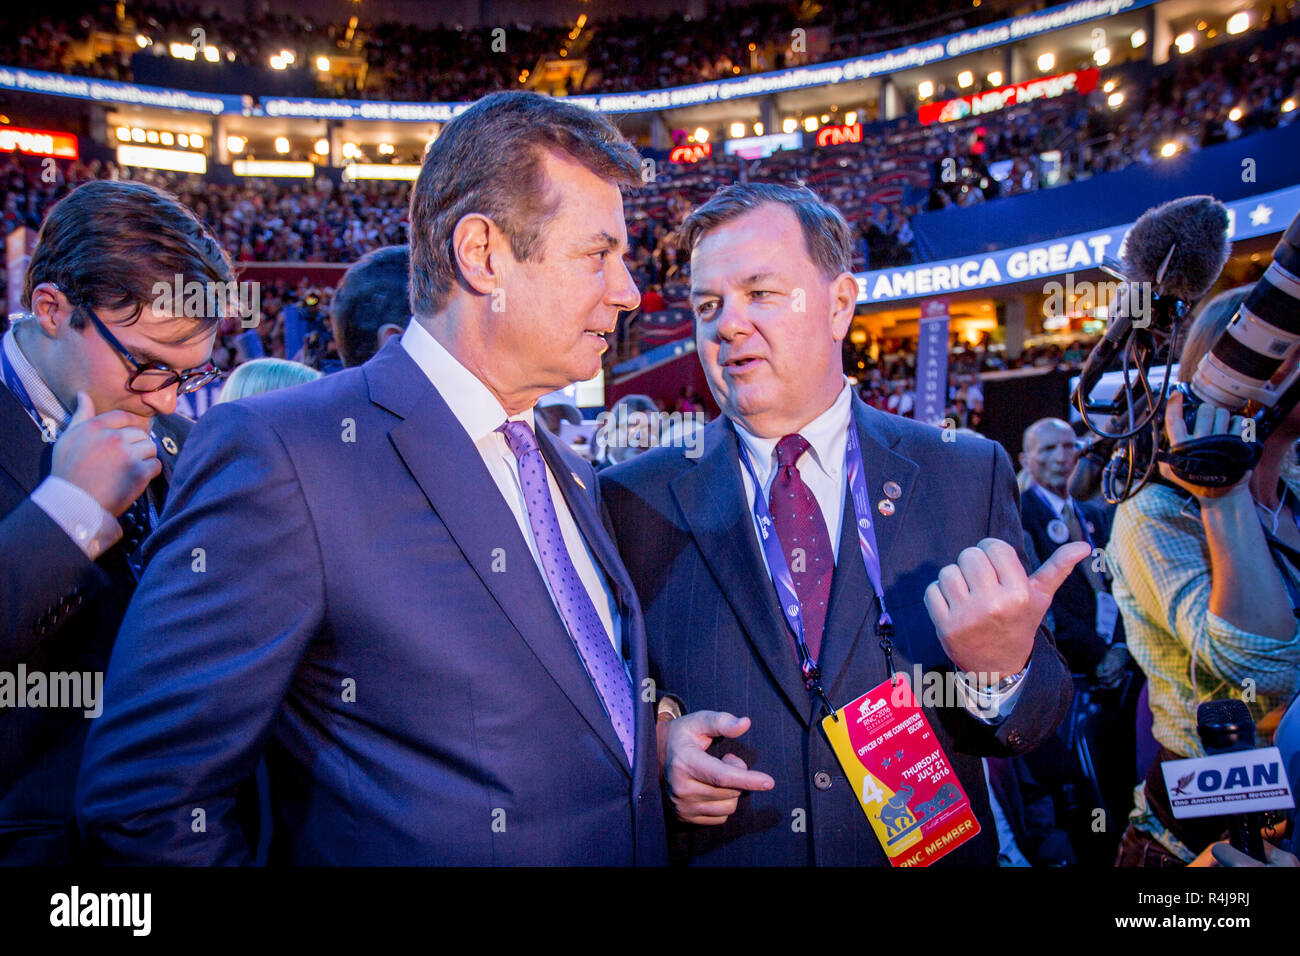 Former Trump campaign manager Paul Manafort at The Republican National Convention in Cleveland Stock Photo